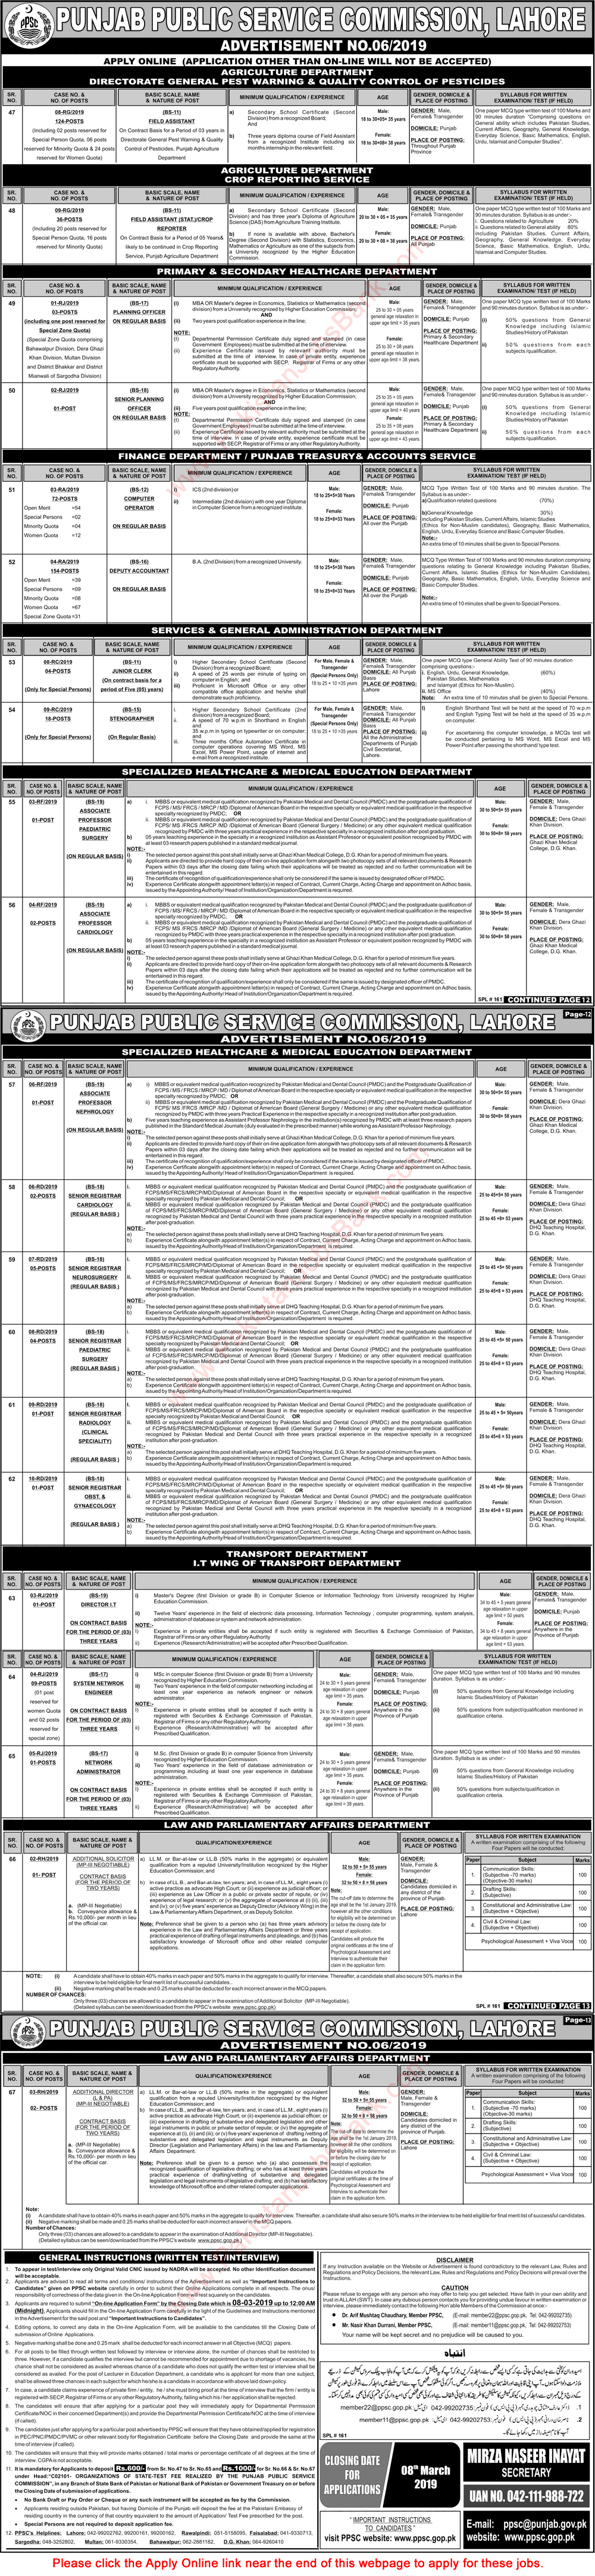 PPSC Jobs February 2019 Apply Online Consolidated Advertisement No 6/2019 06/2019 Latest